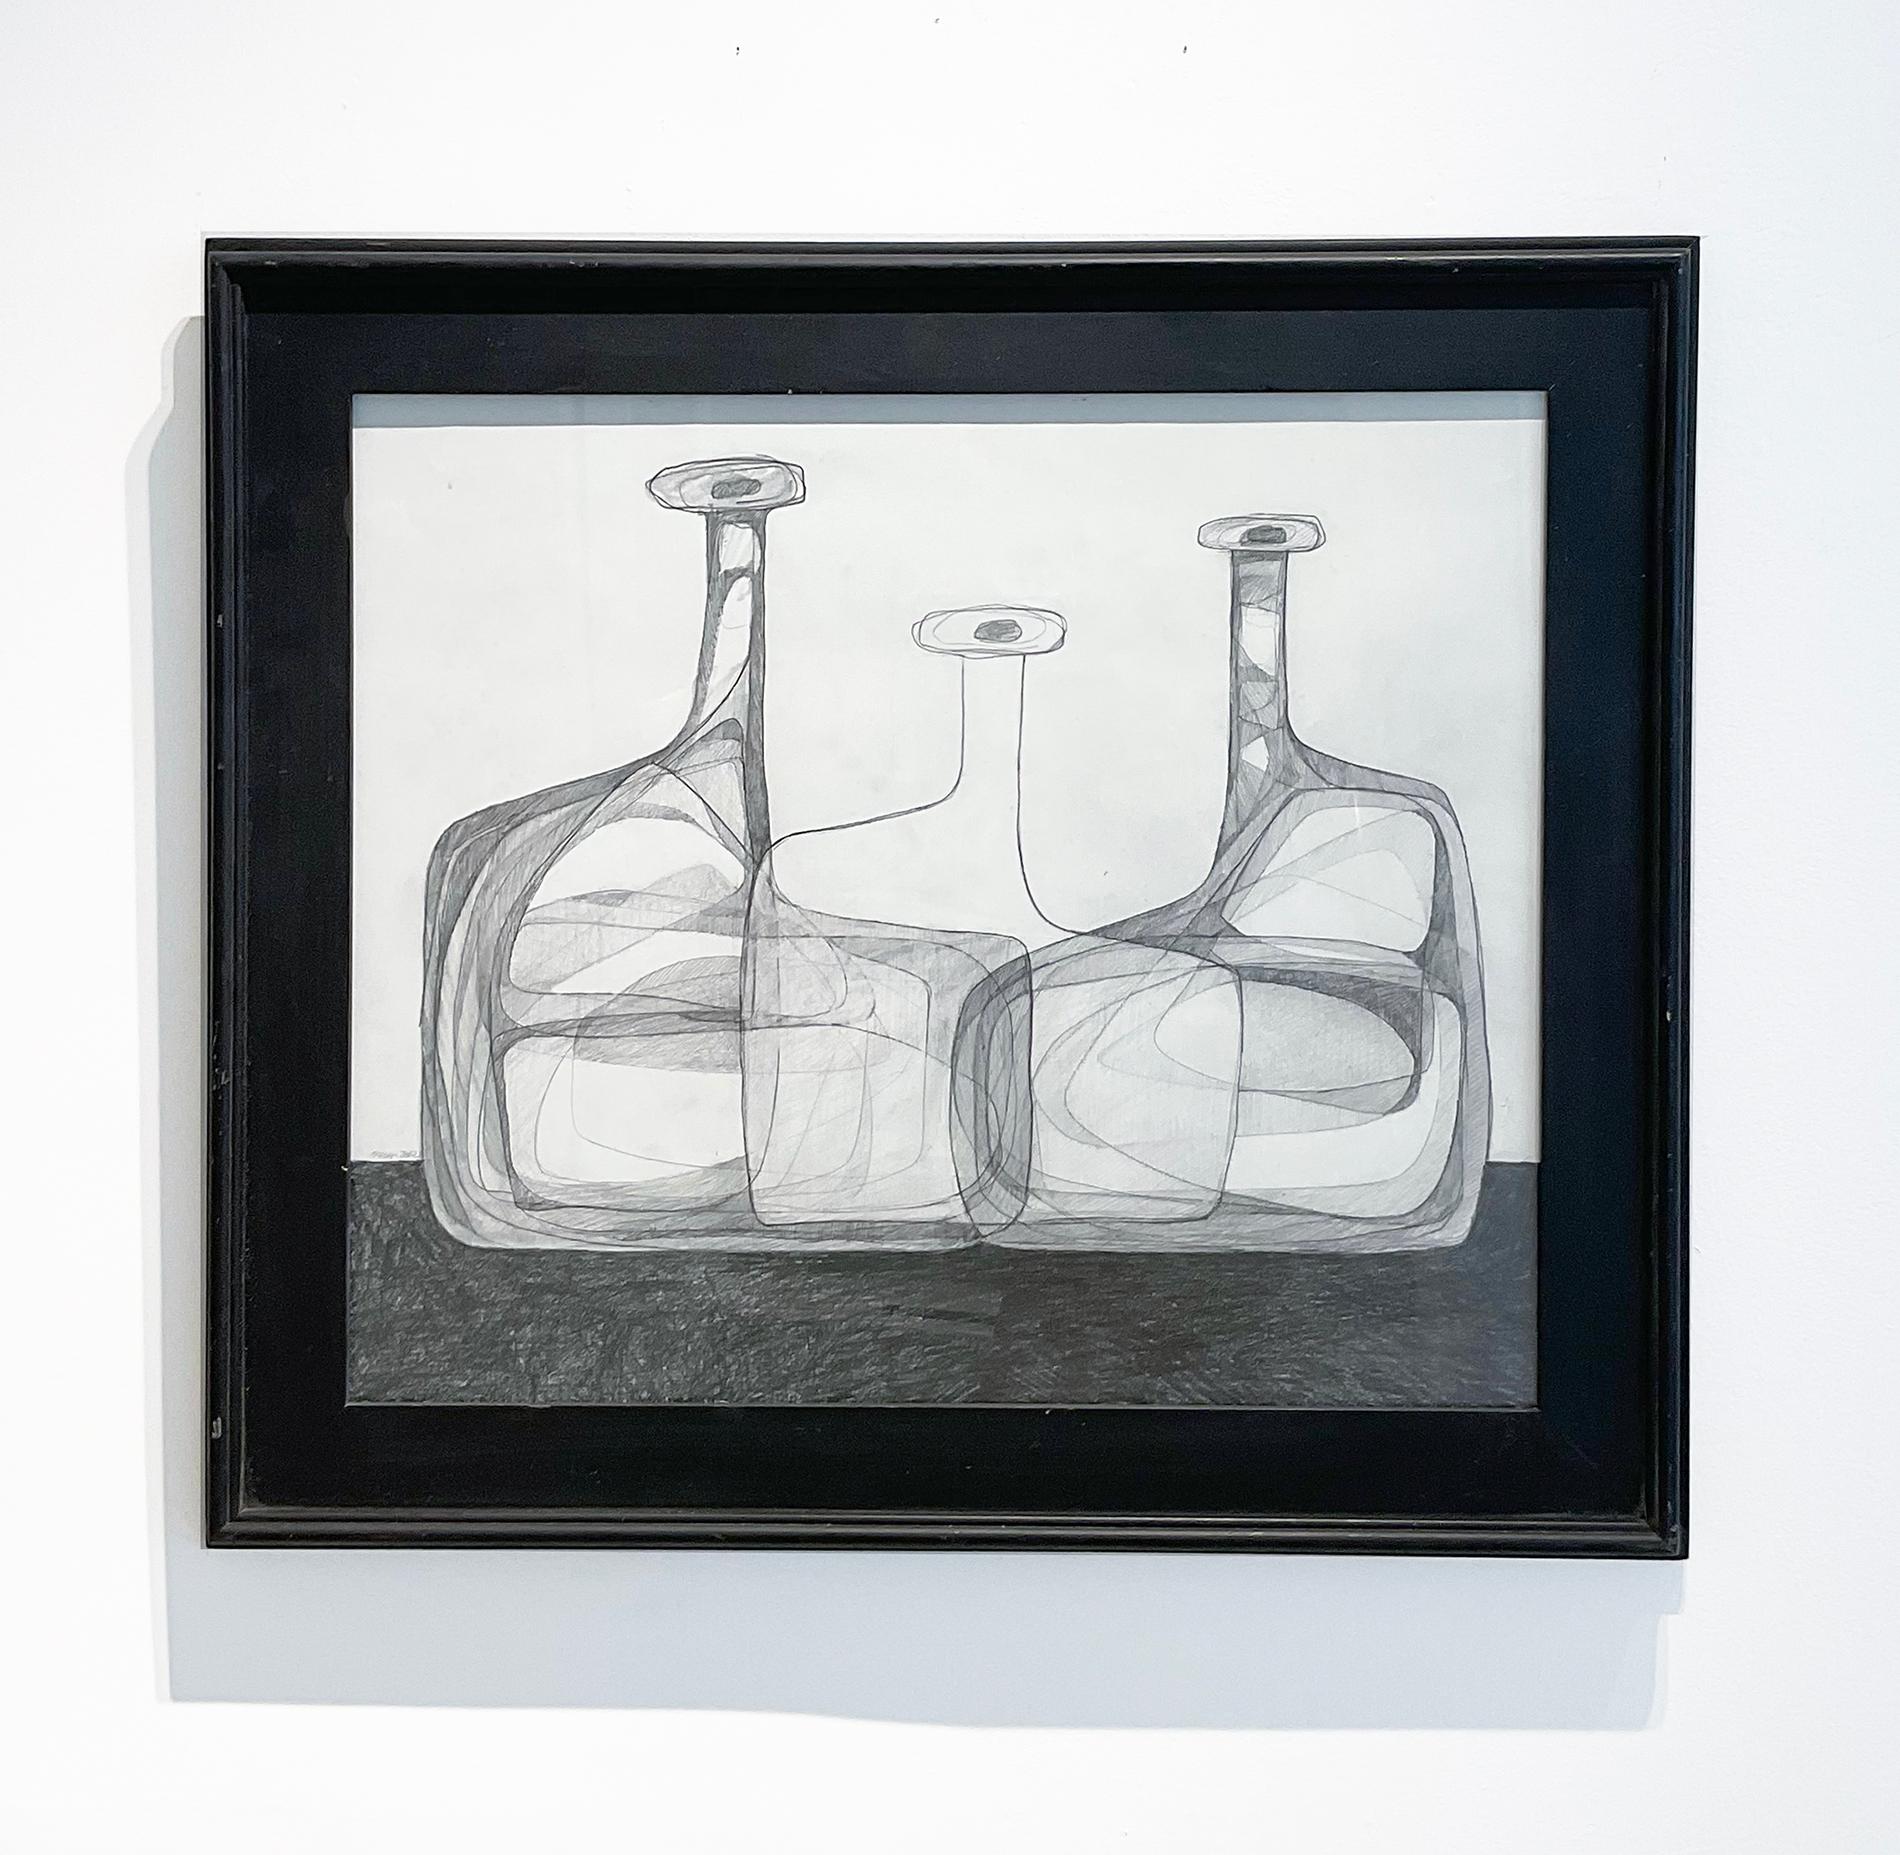 Three Bottles II: Abstract Cubist Style Morandi Bottle Still Life Pencil Drawing - Gray Abstract Drawing by David Dew Bruner